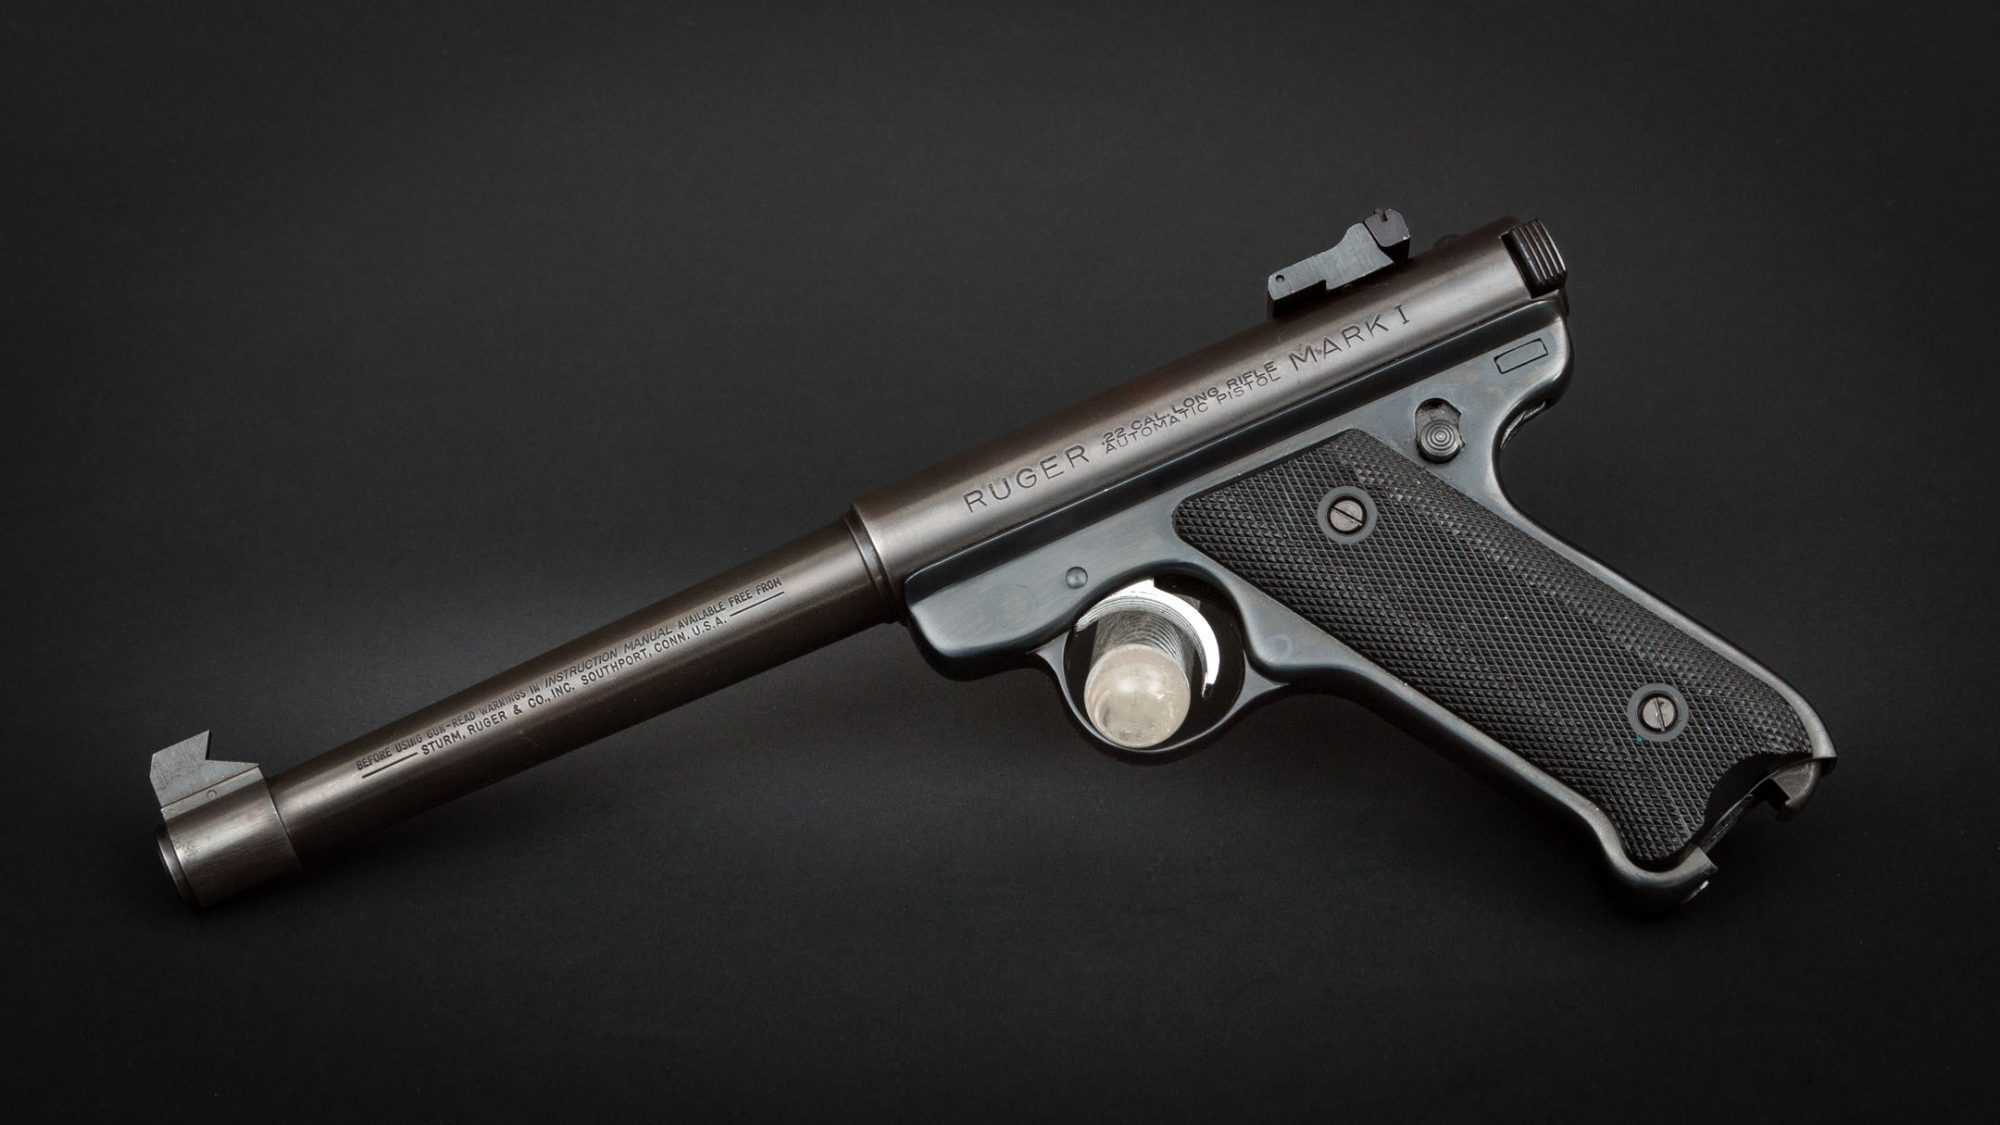 Ruger Mark I Target pistol chambered in 22 Long Rifle, for sale by Turnbull Restoration of Bloomfield, NY